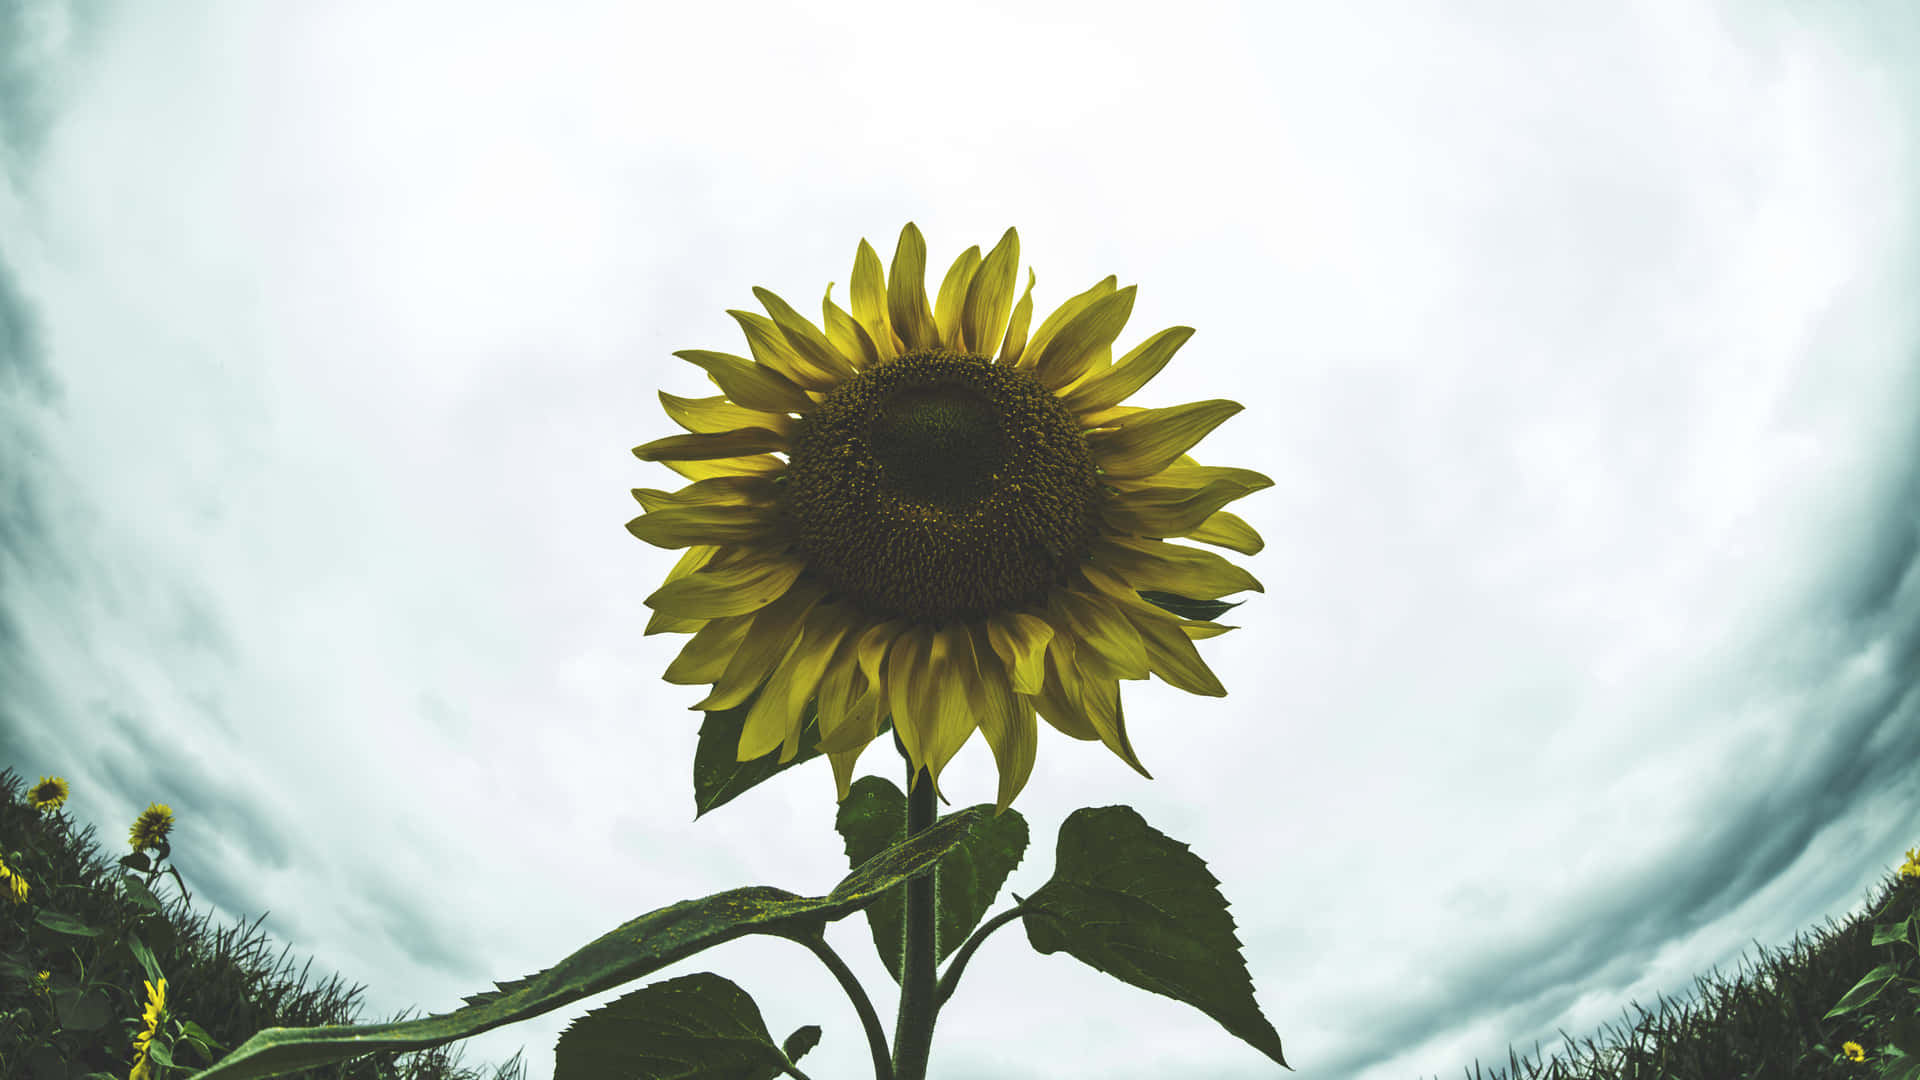 A Sunflower In A Field With A Cloudy Sky Wallpaper